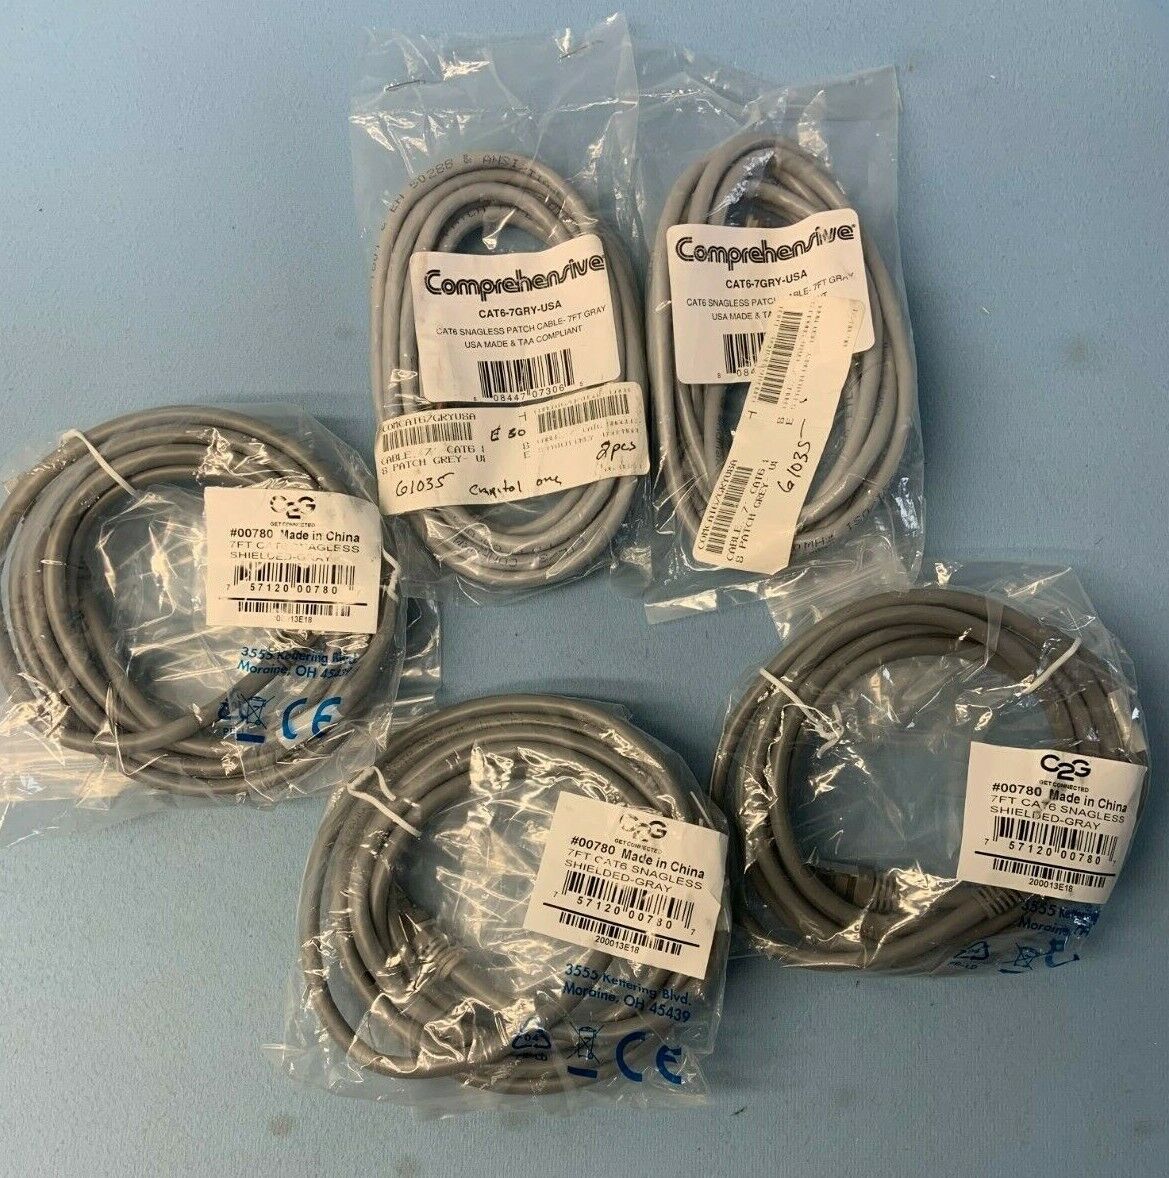 Lot of 5 Comprehensive CAT6 550 MHz Snagless Patch 7ft Gray Cables CAT6-7GRY-USA